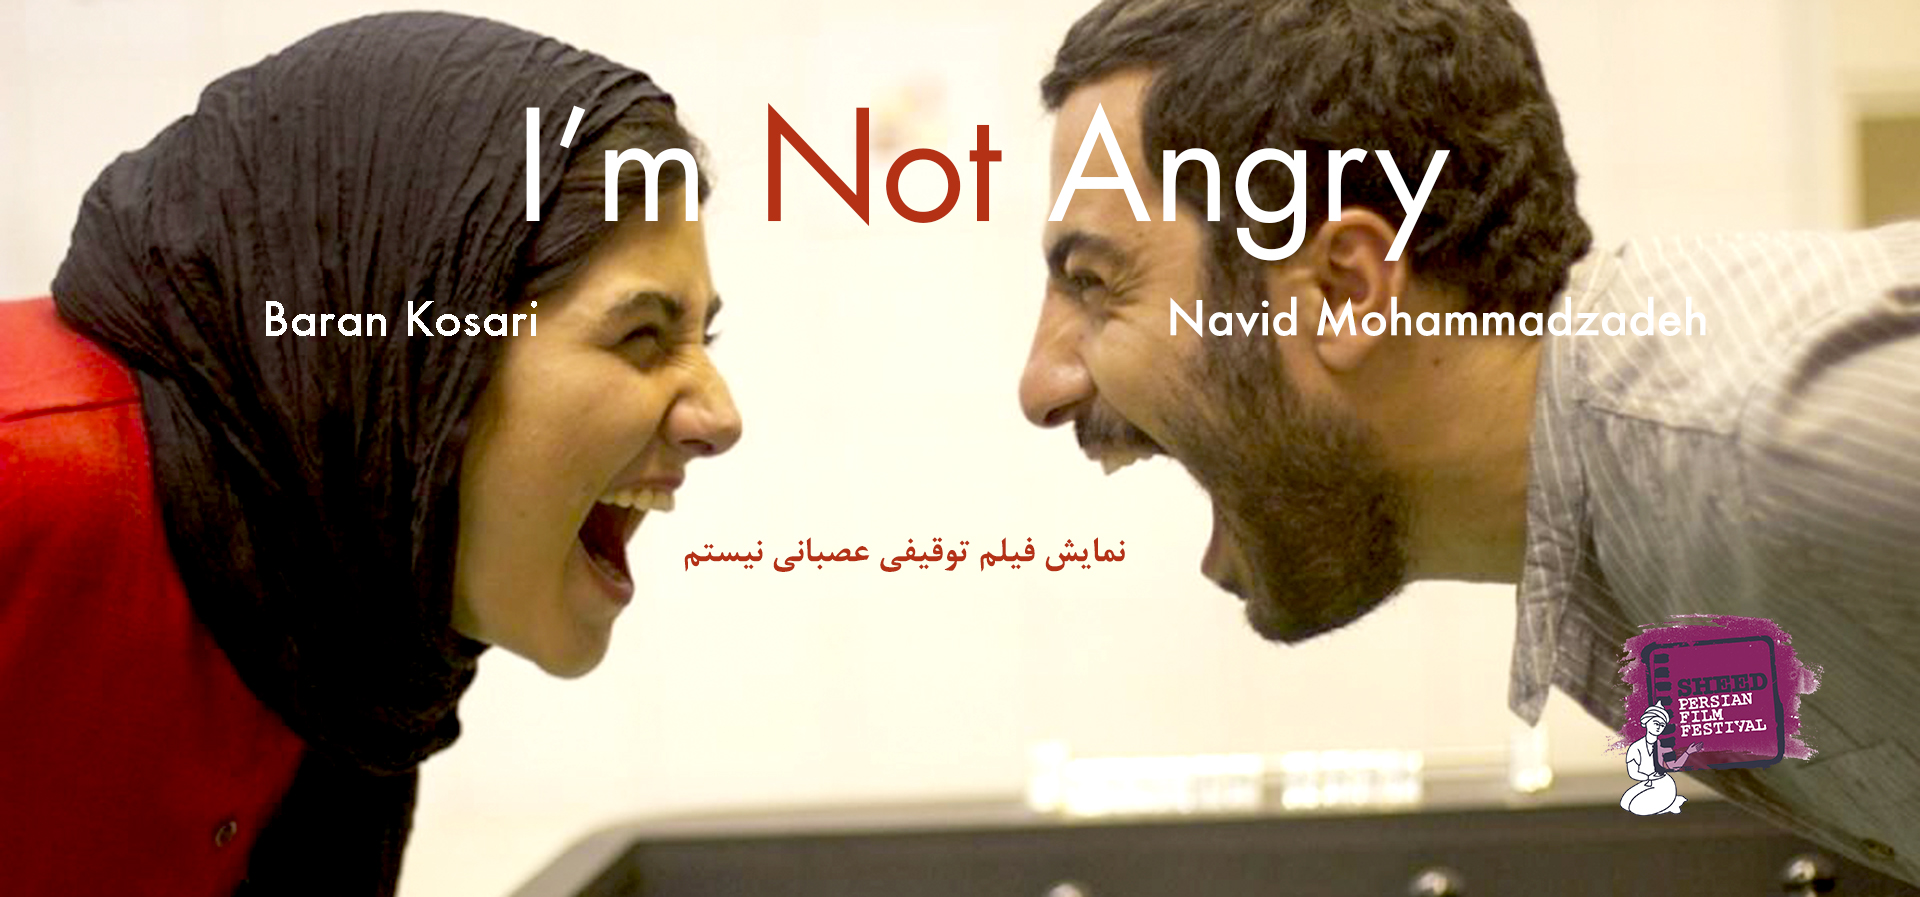 I'm Not Angry